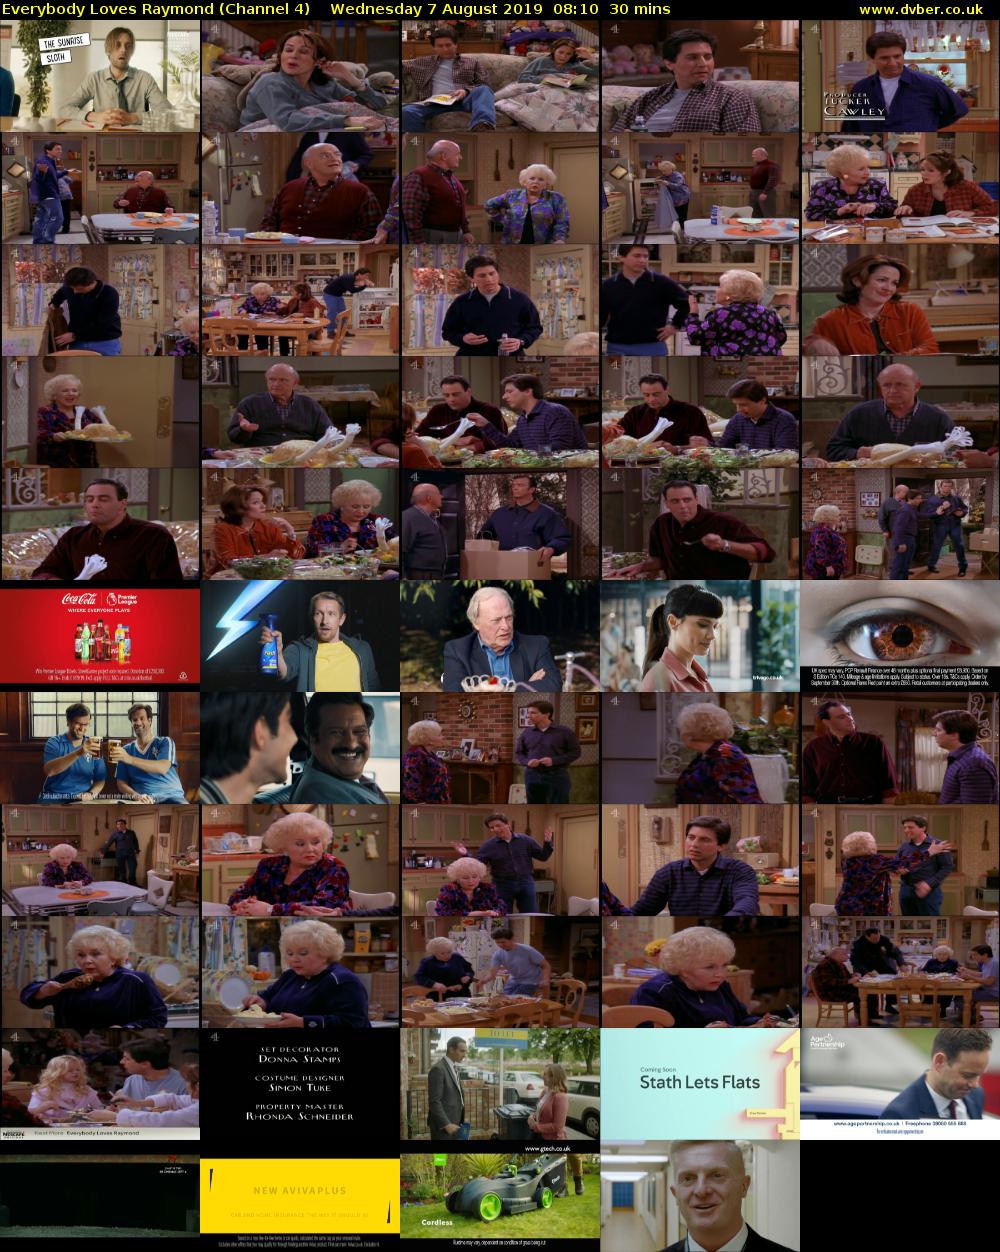 Everybody Loves Raymond (Channel 4) Wednesday 7 August 2019 08:10 - 08:40